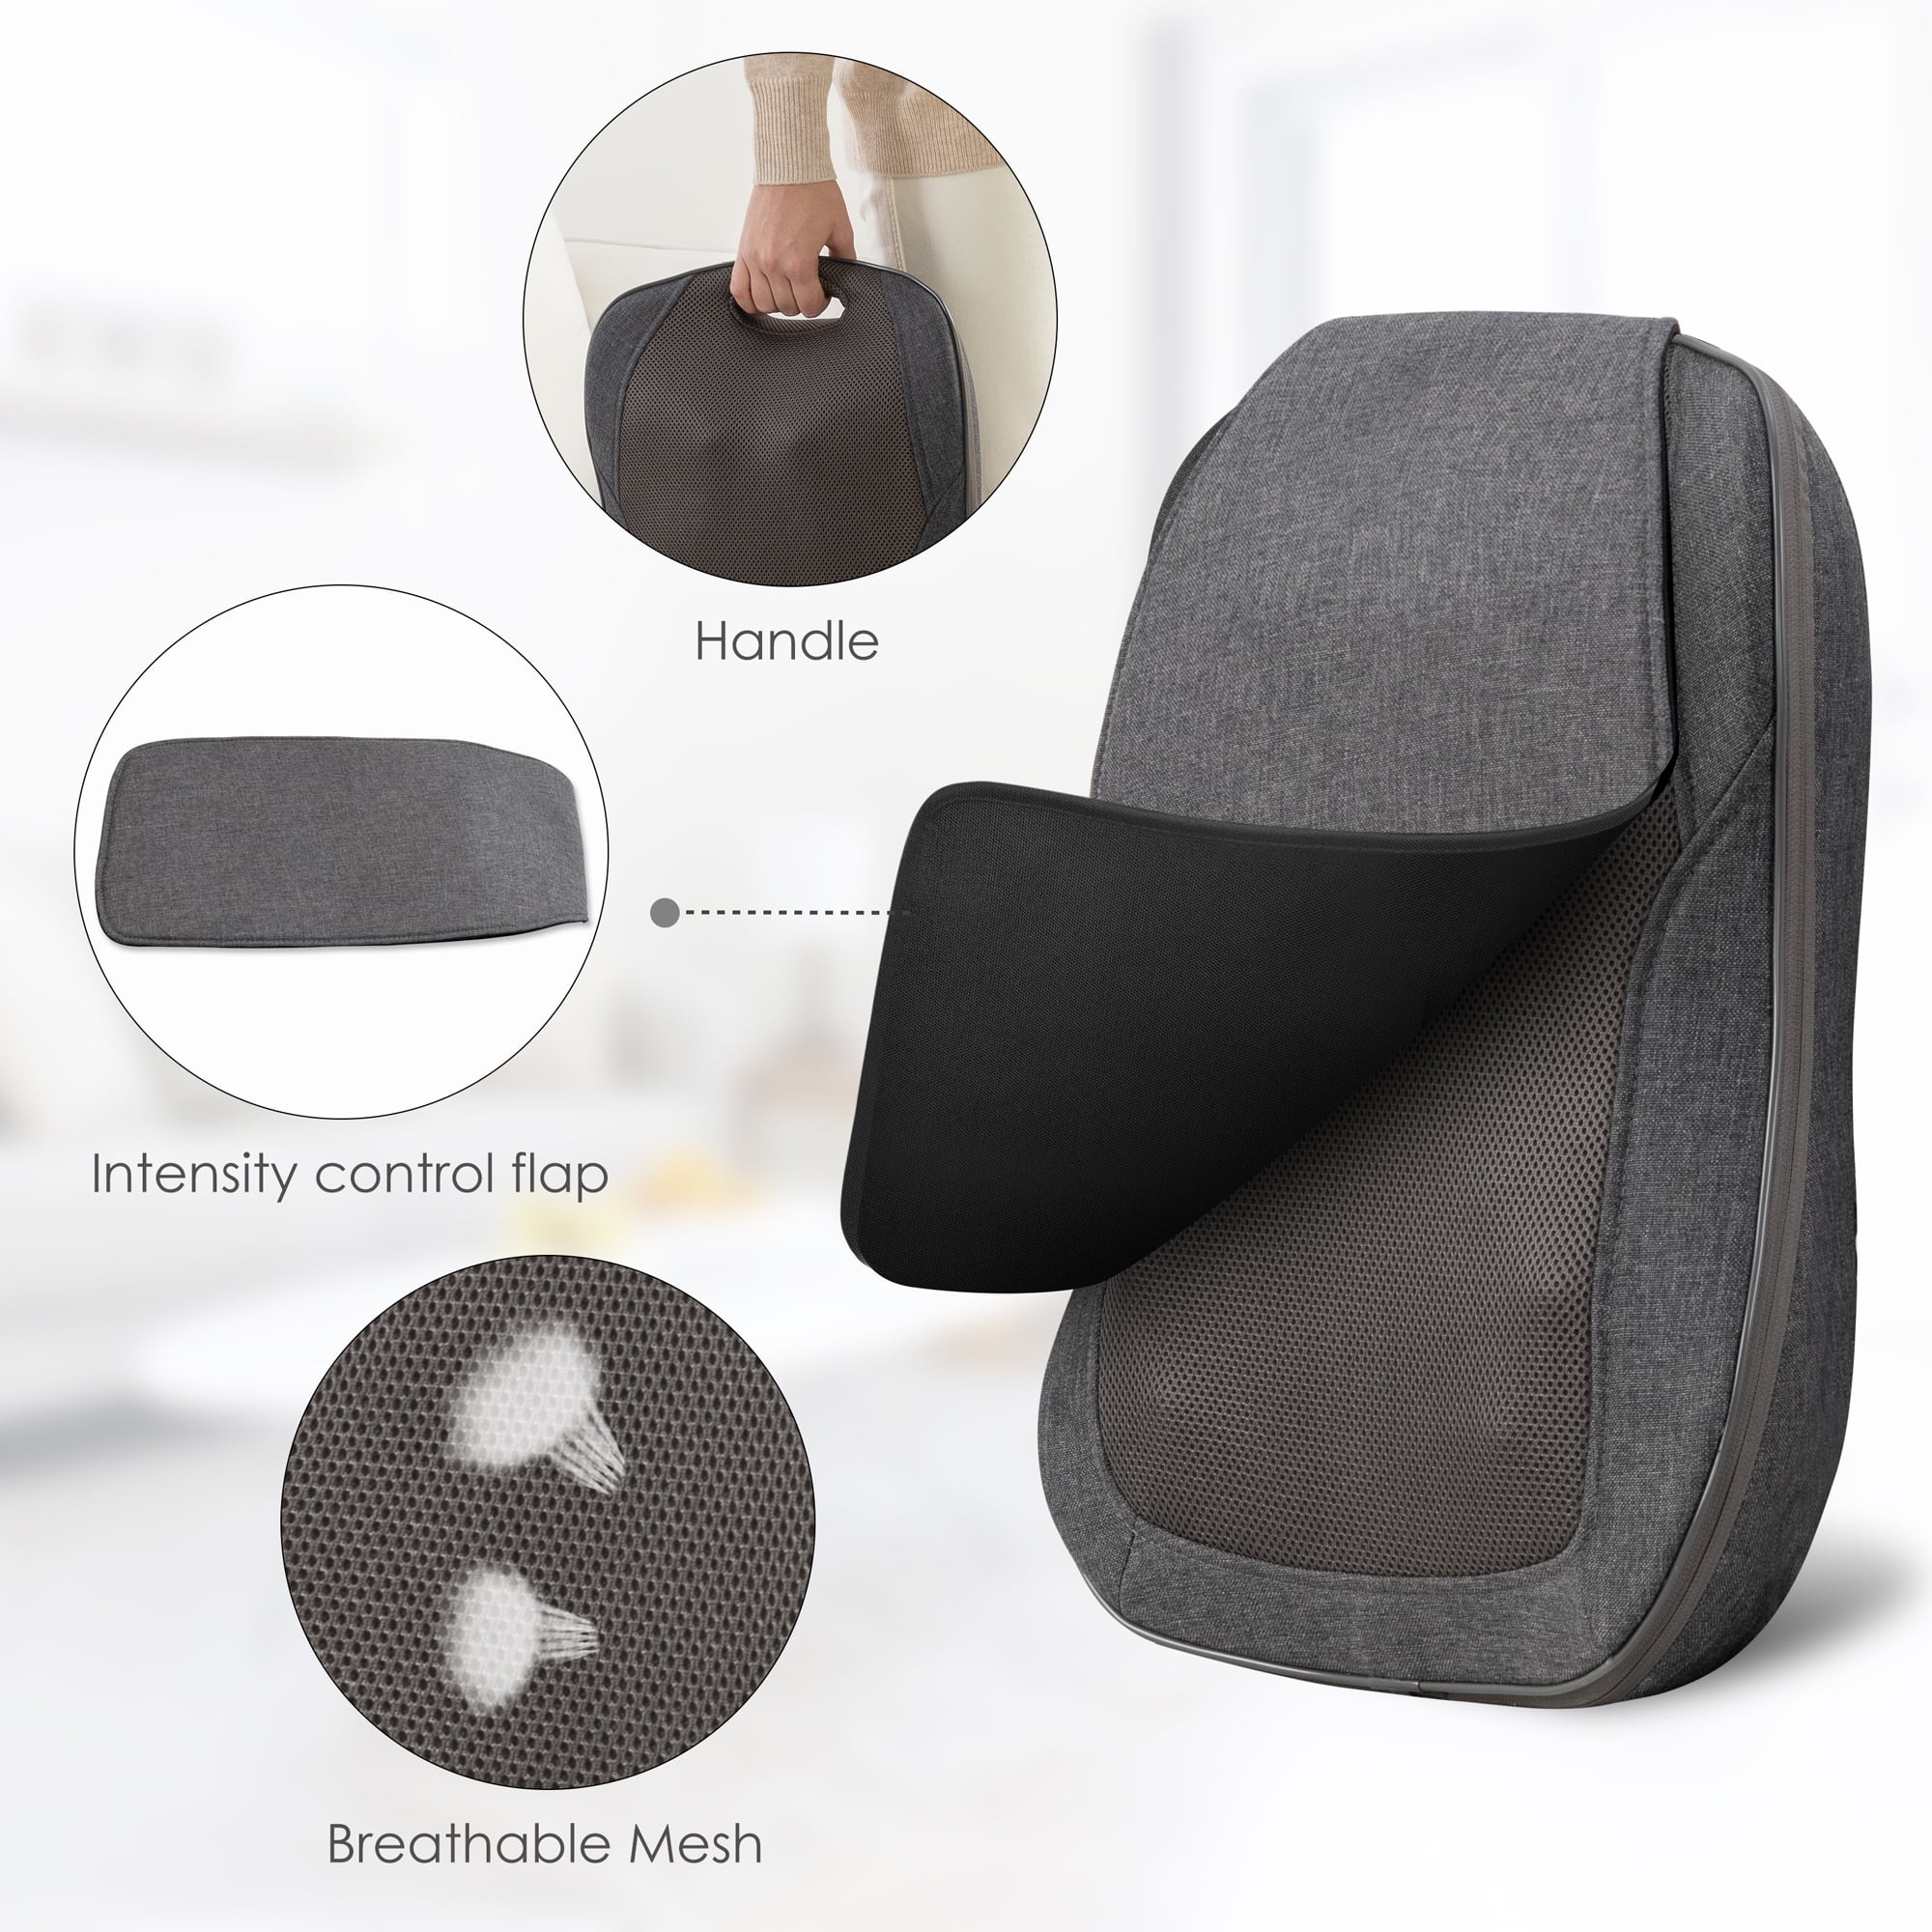  Shiatsu Deep Kneading Back Massager - 12 Rolling Nodes Heated  Portable Electric Massage Chair Pad - Relax, Relief Back Pain and Muscle  Soreness - Home, Office, Car Use : Health & Household